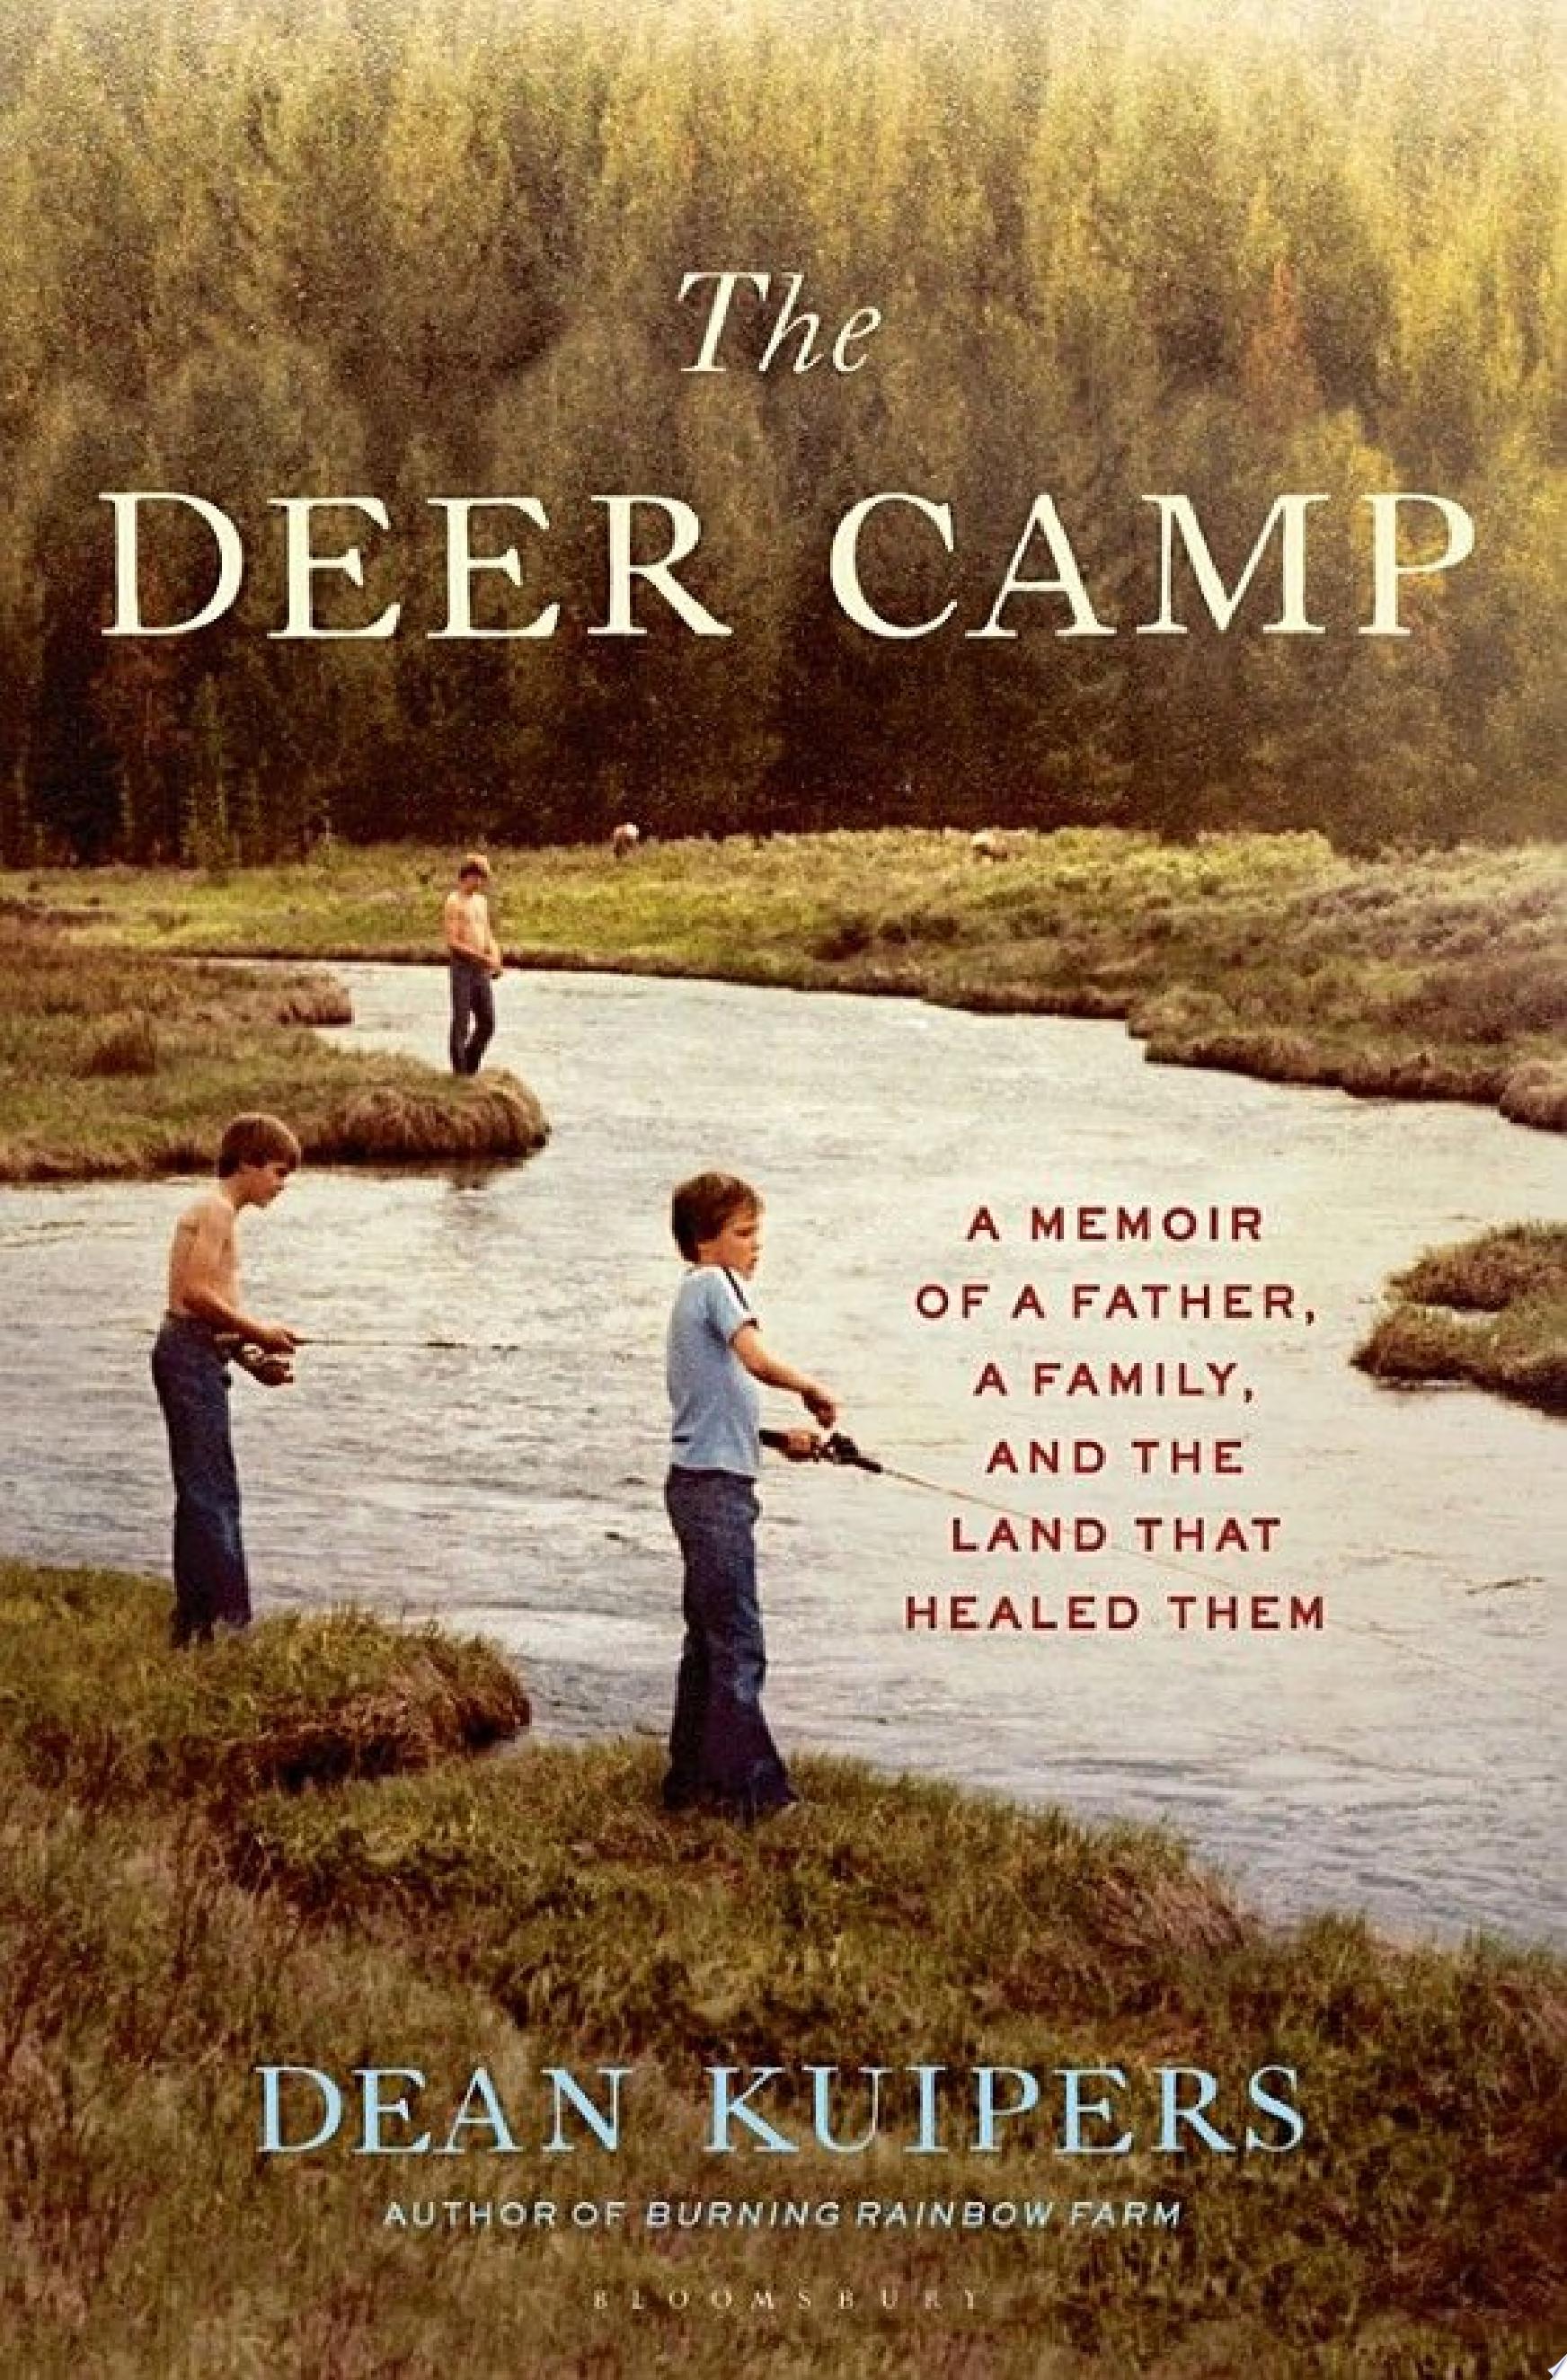 Image for "The Deer Camp"